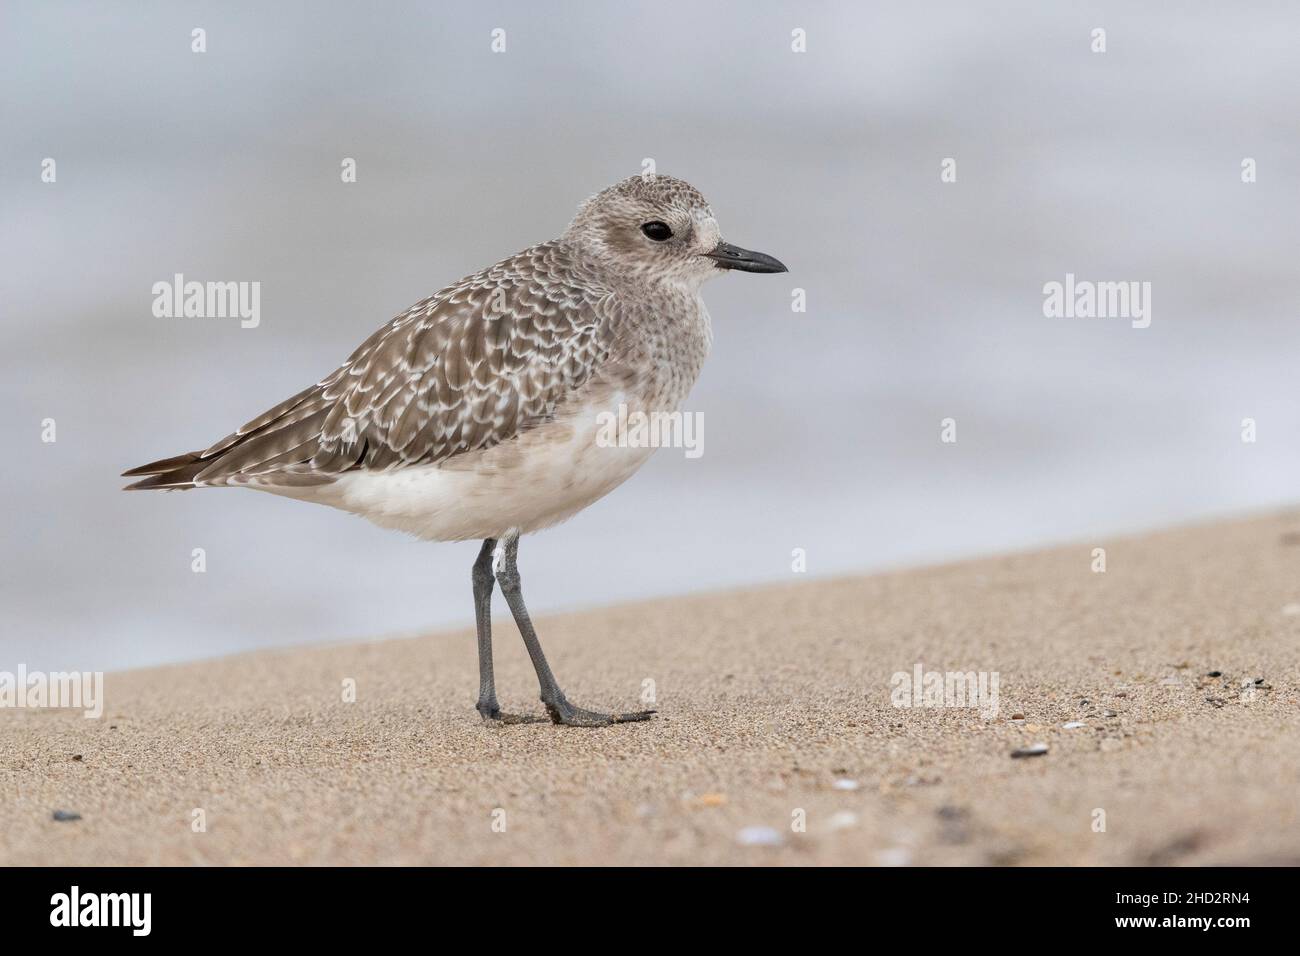 Grey Plover (Pluvialis squatarola), side view of an adult in winter plumage standing on the sand, Campania, Italy Stock Photo